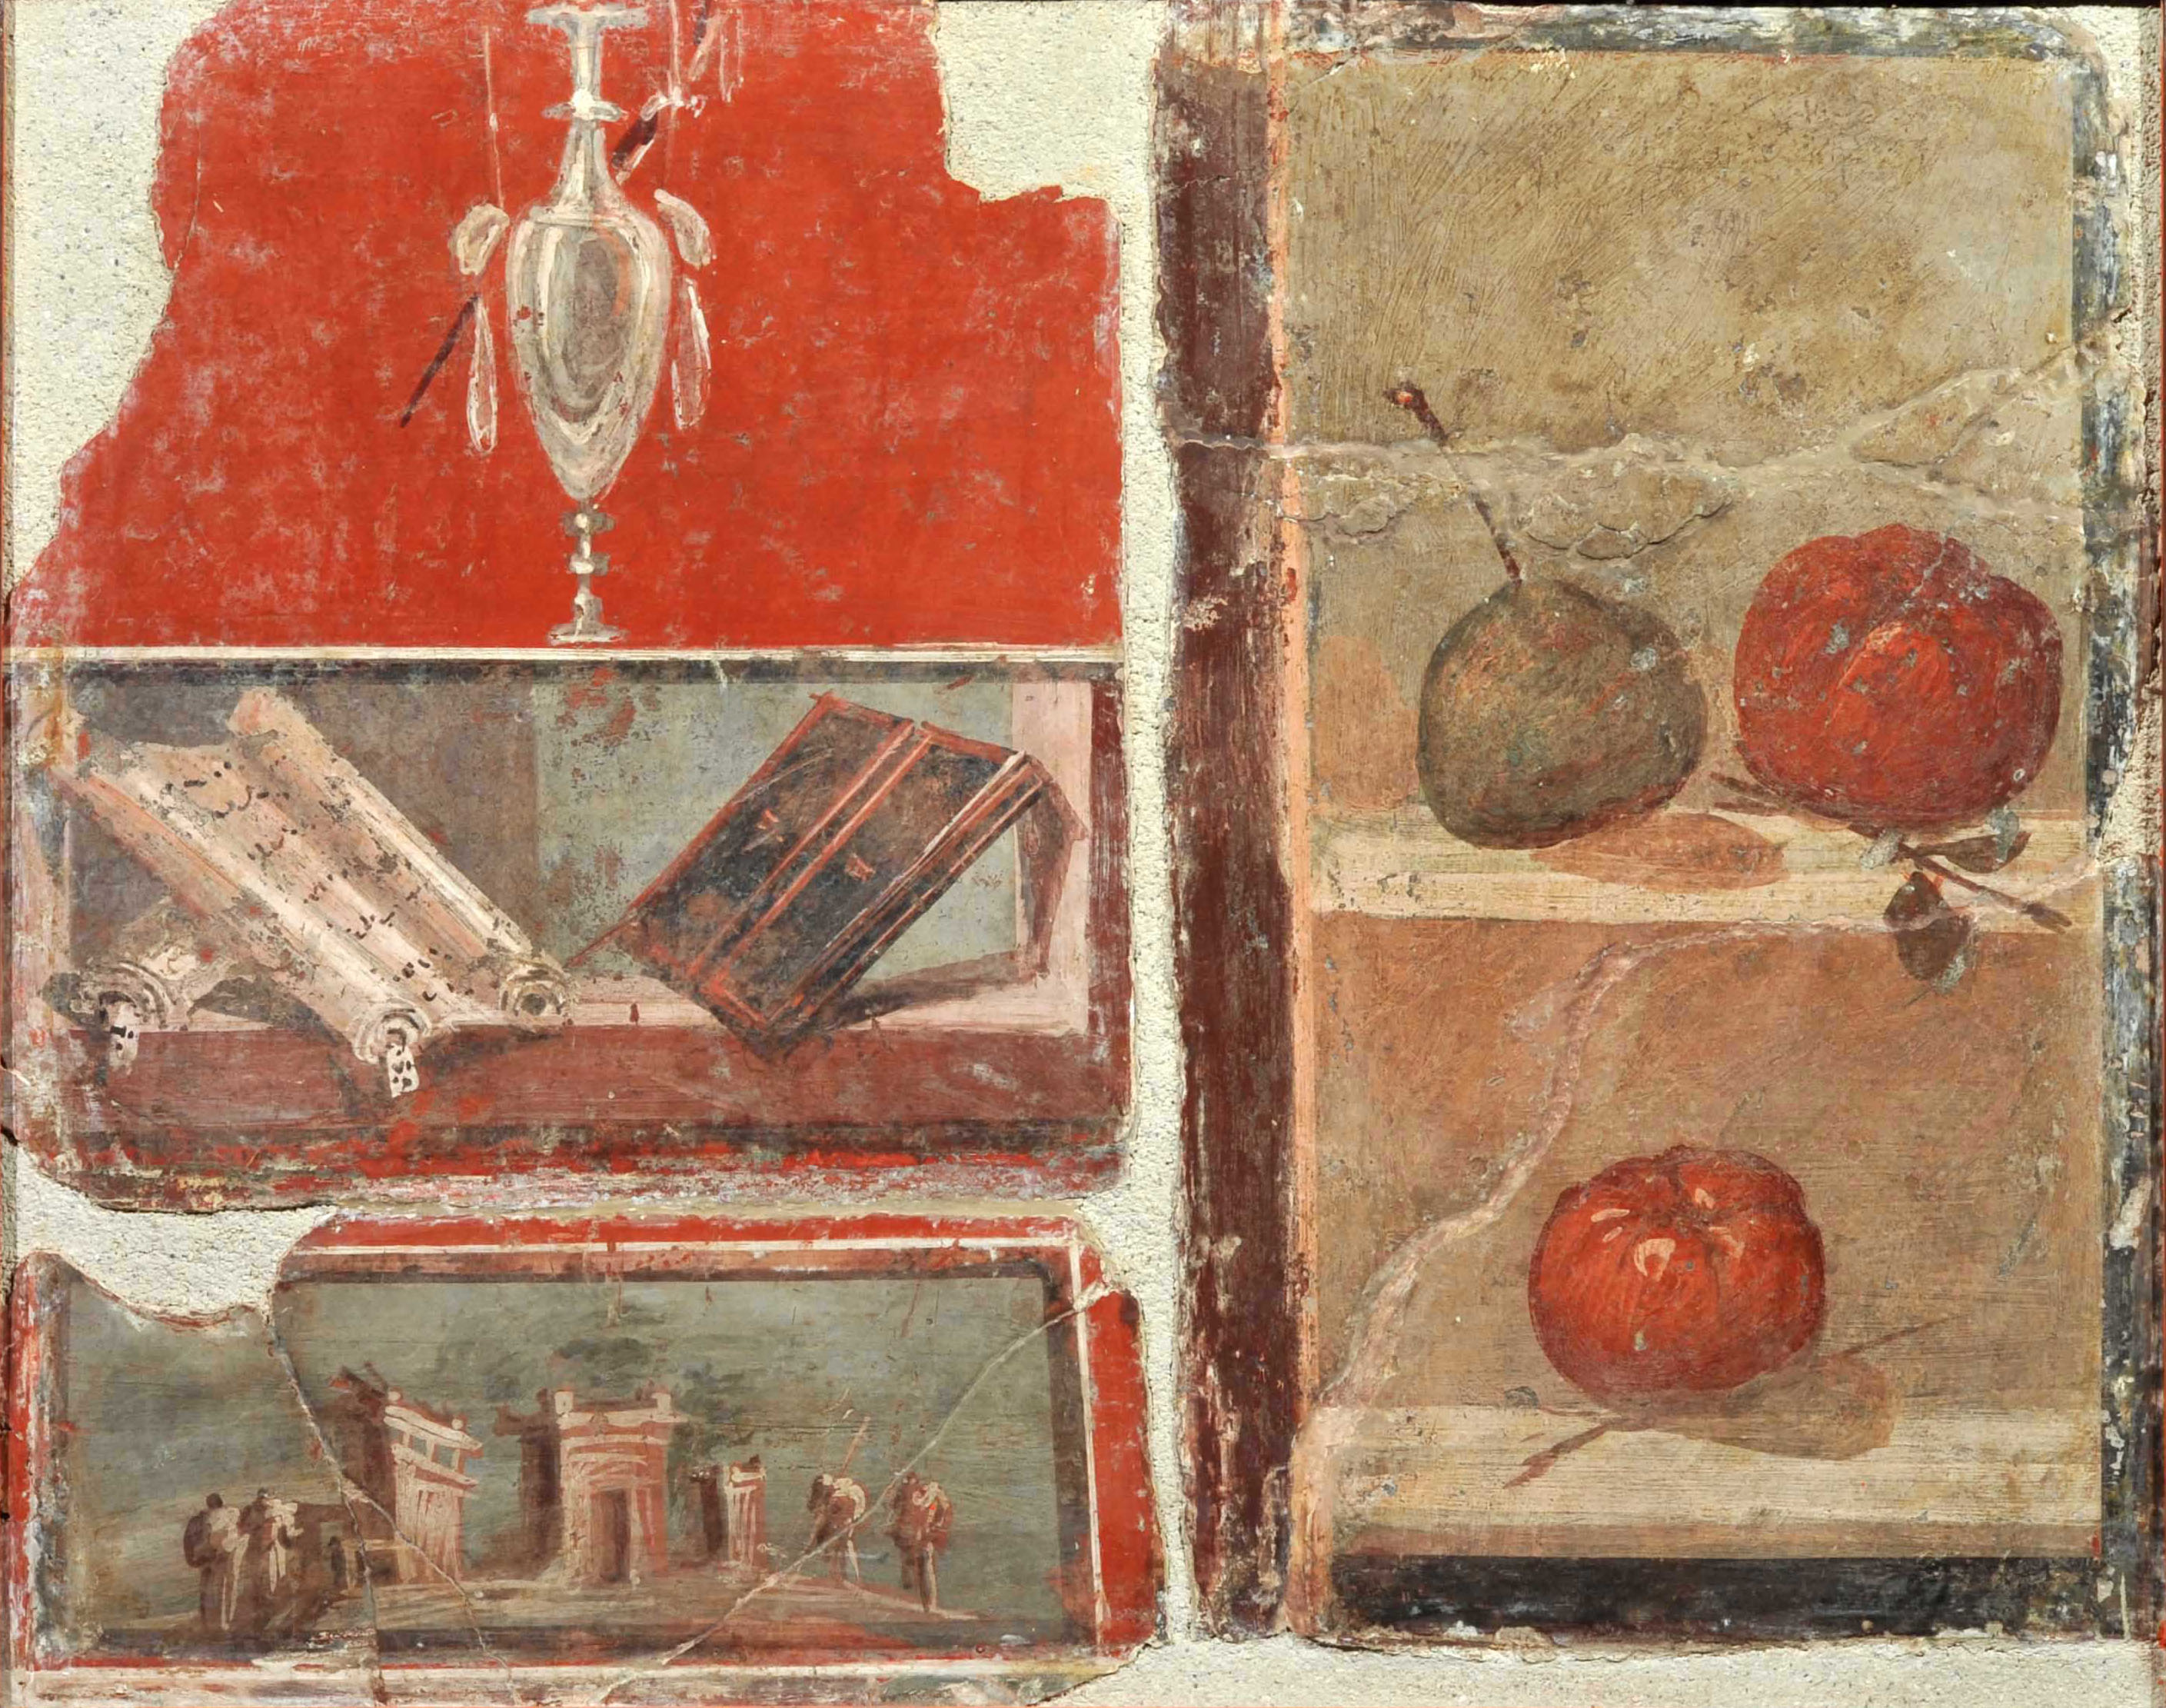 The Pleasures of Pompeii: A Day of Creative Writing